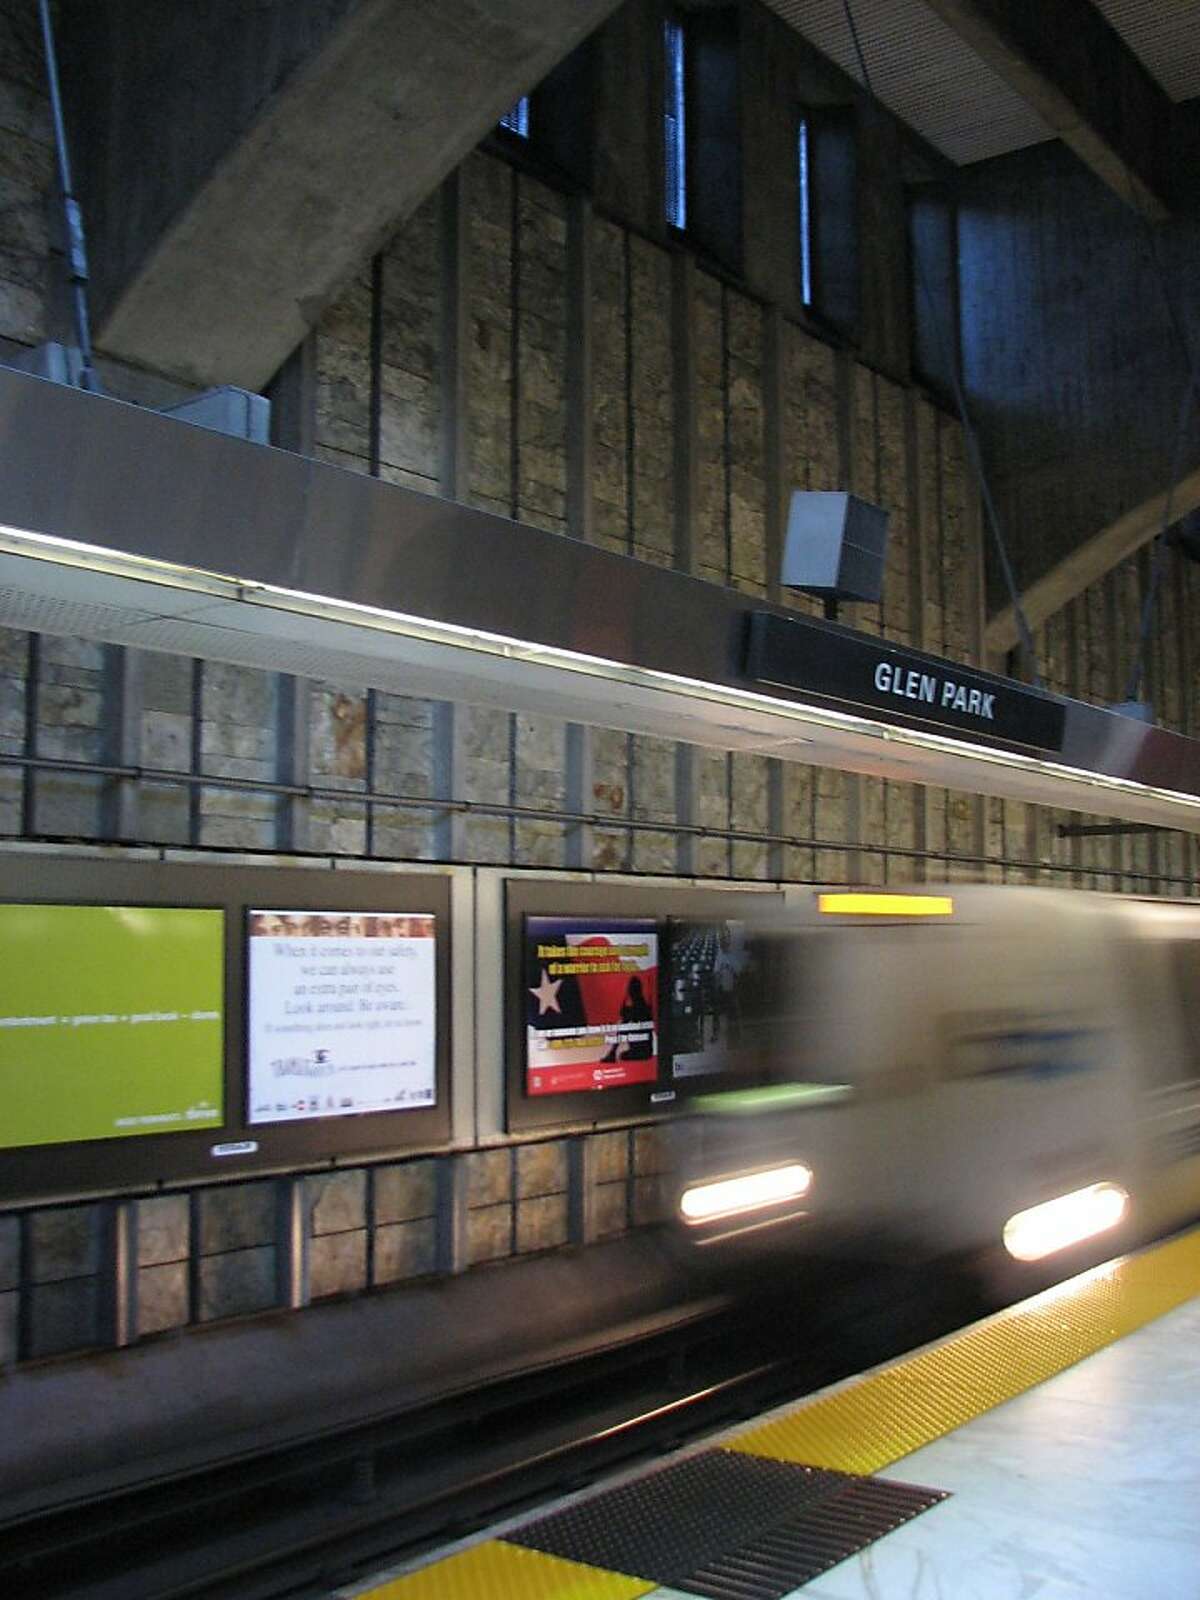 What the Glen Park BART station lacks in way of fancy architectural touches, it makes up for with structural drama and a shadowy aura Ran on: 10-04-2009 Photo caption Dummy text goes here. Dummy text goes here. Dummy text goes here. Dummy text goes here. Dummy text goes here. Dummy text goes here. Dummy text goes here. Dummy text goes here.###Photo: 0###Live Caption:What the Glen Park BART station lacks in way of fancy architectural touches, it makes up for with structural drama and a shadowy aura###Caption History:What the Glen Park BART station lacks in way of fancy architectural touches, it makes up for with structural drama and a shadowy aura###Notes:###Special Instructions: Ran on: 10-04-2009 Photo caption Dummy text goes here. Dummy text goes here. Dummy text goes here. Dummy text goes here. Dummy text goes here. Dummy text goes here. Dummy text goes here. Dummy text goes here.###Photo: 0###Live Caption:What the Glen Park BART station lacks in way of fancy architectural touches, it makes up for with structural drama and a shadowy aura###Caption History:What the Glen Park BART station lacks in way of fancy architectural touches, it makes up for with structural drama and a shadowy aura###Notes:###Special Instructions: